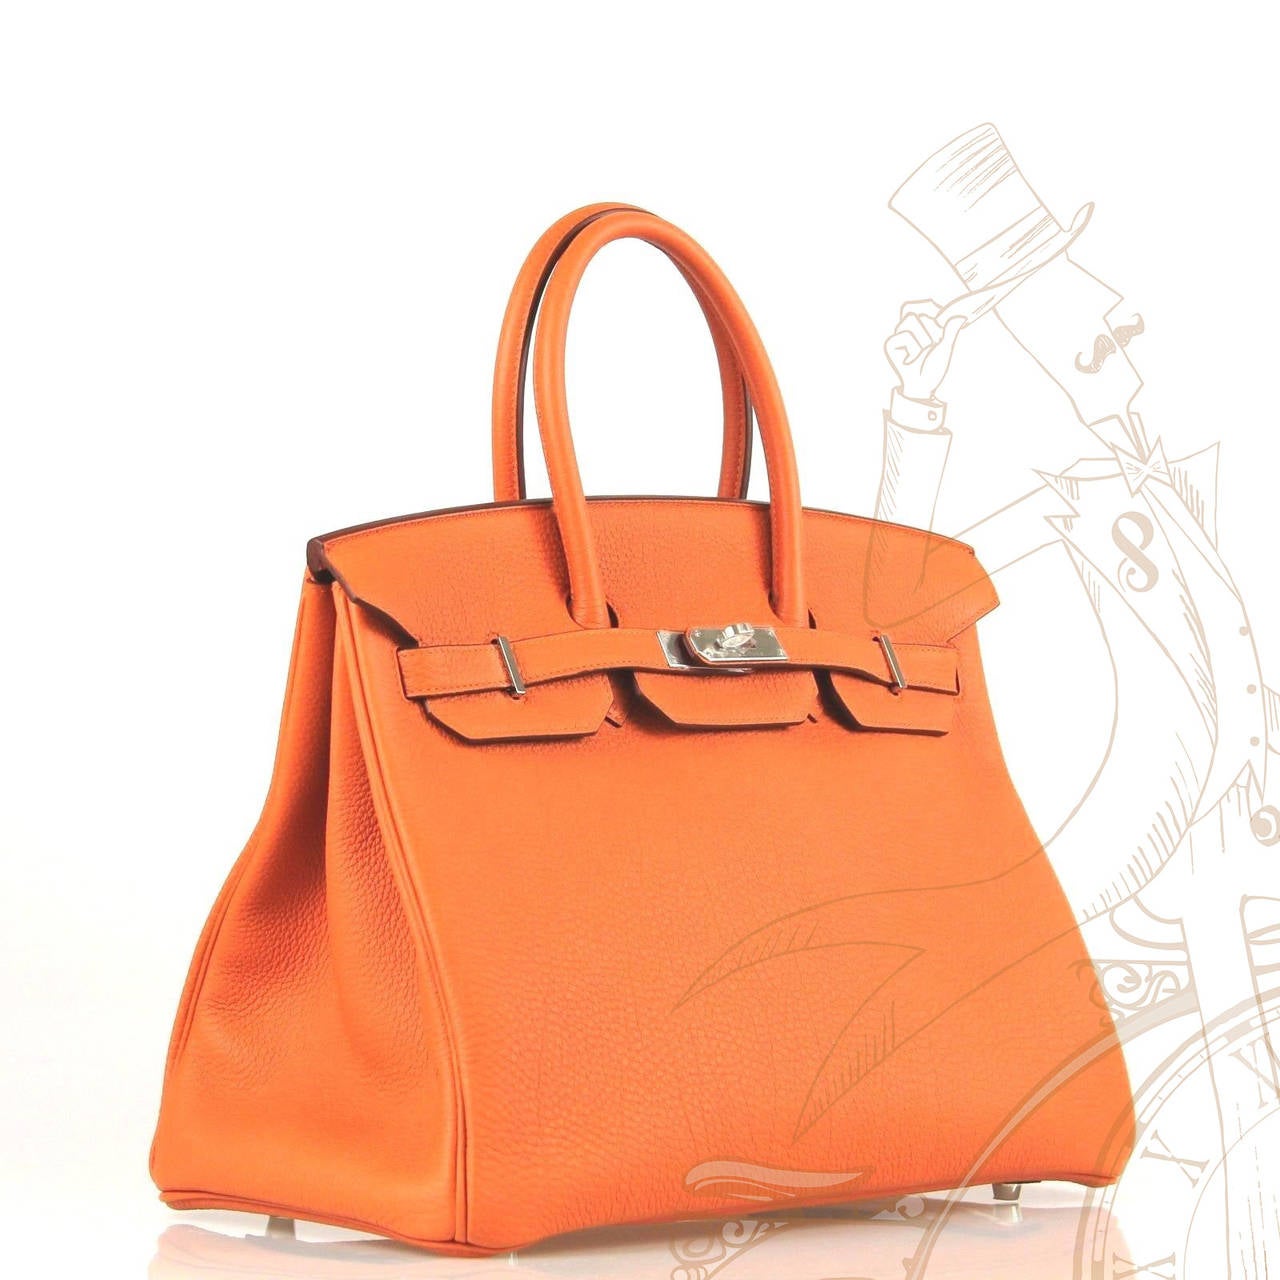 This is an authentic Hermes Togo Leather Classic Birkin 35 in Orange. This Birkin togo leather in classic orange with trim found at the piping, side gussets, top handles and straps. The bag features rolled top handles, a strap closure with a silver